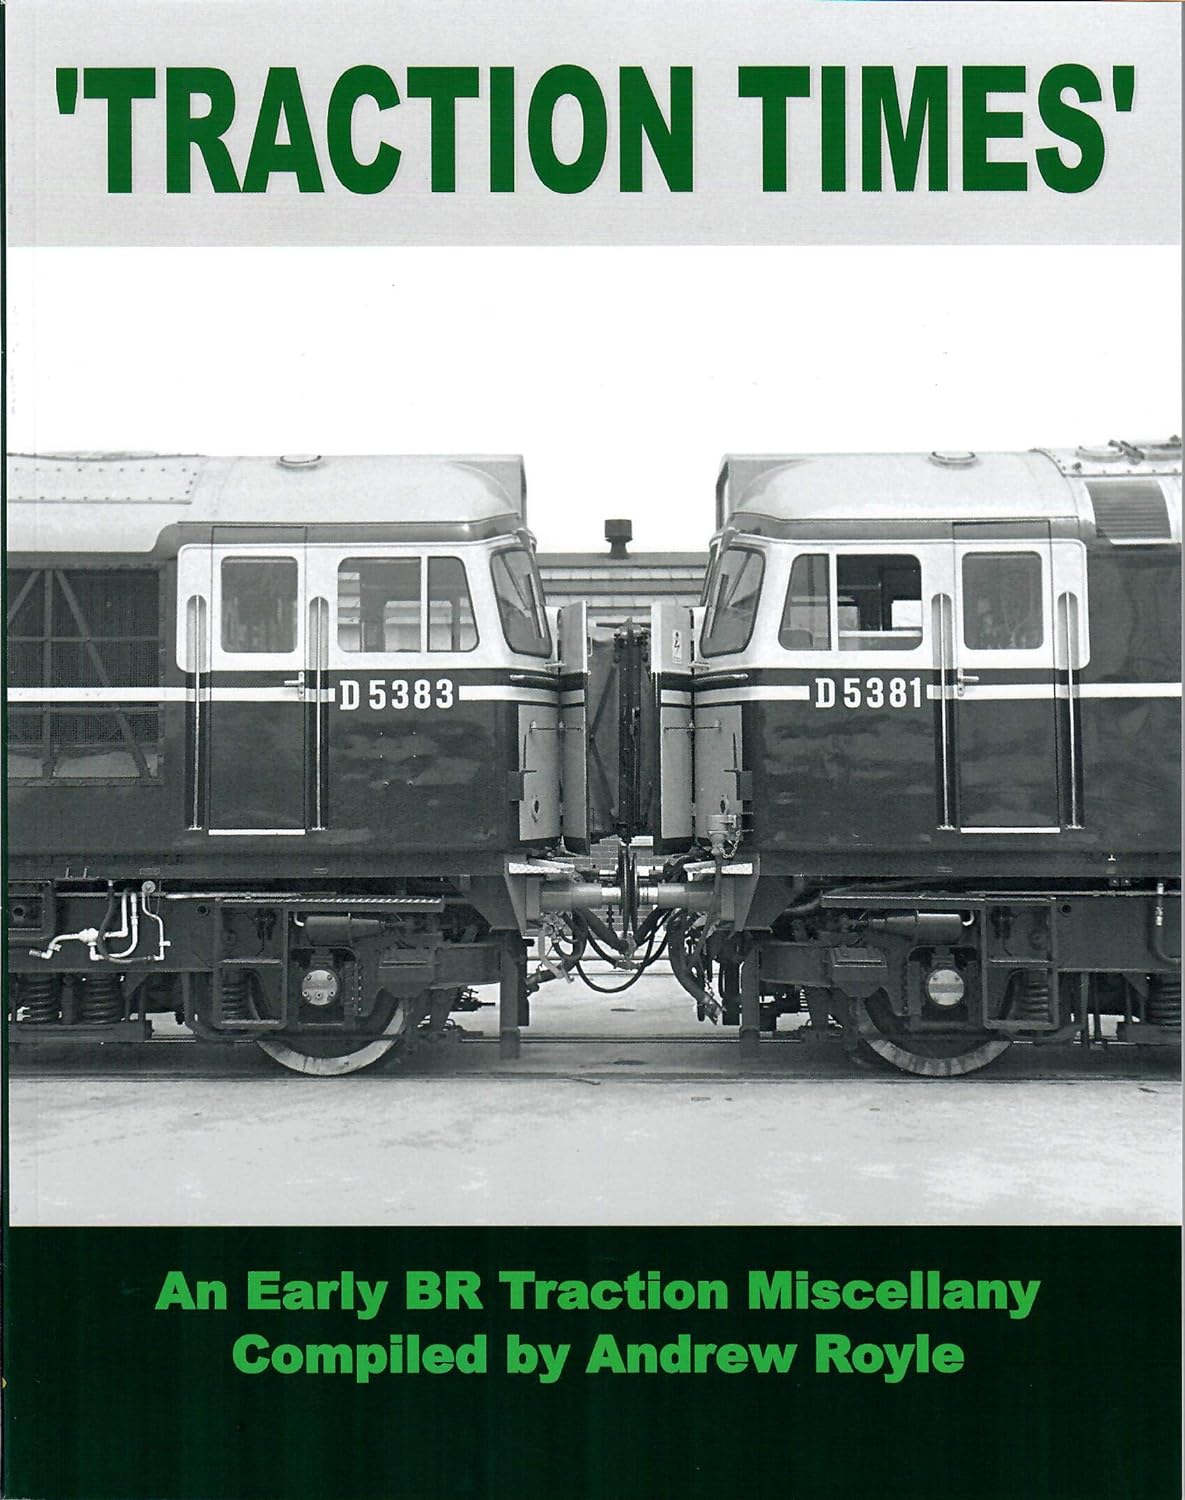 Traction Times: An Early BR Traction Miscellany